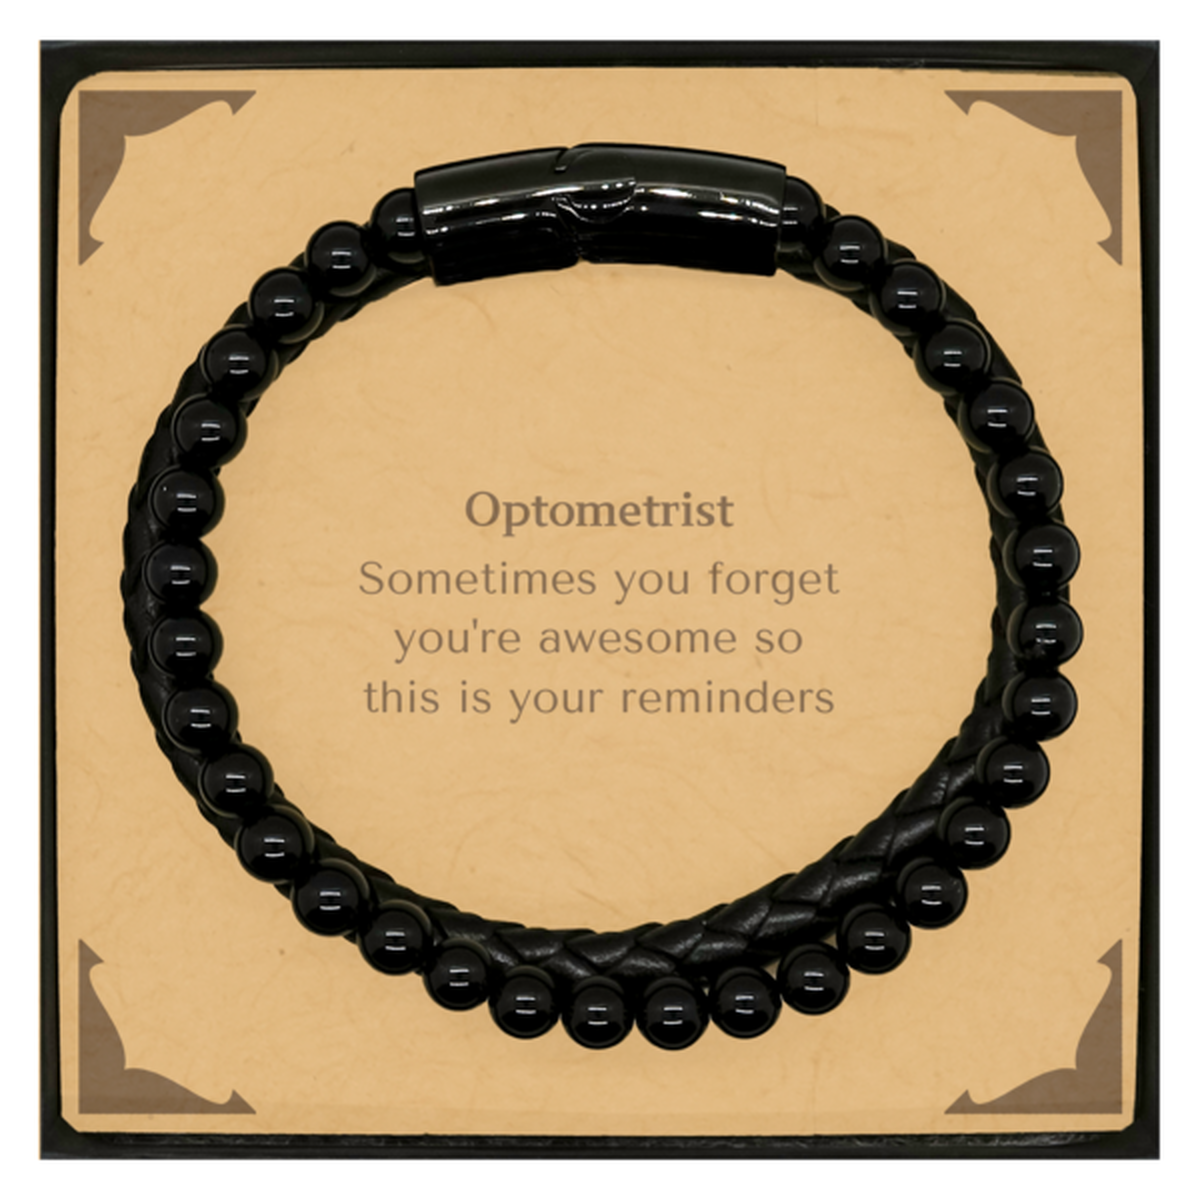 Sentimental Optometrist Stone Leather Bracelets, Optometrist Sometimes you forget you're awesome so this is your reminders, Graduation Christmas Birthday Gifts for Optometrist, Men, Women, Coworkers